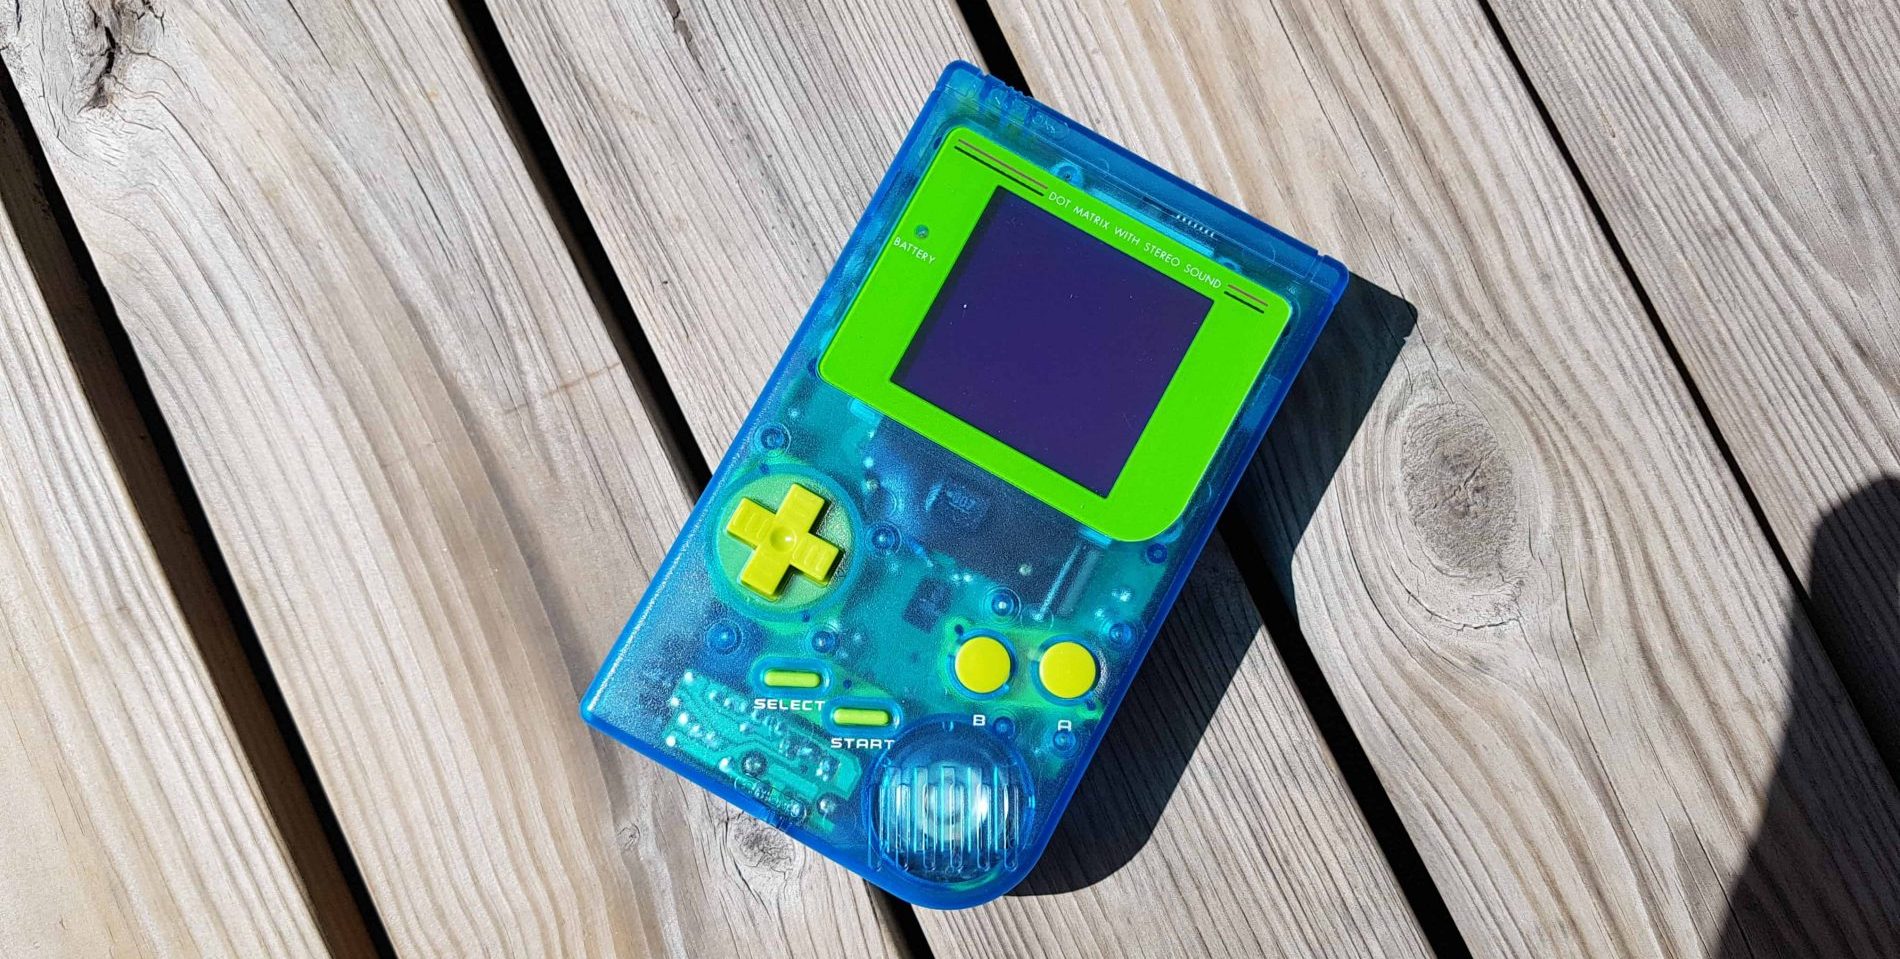 Modded Game Boy with shell